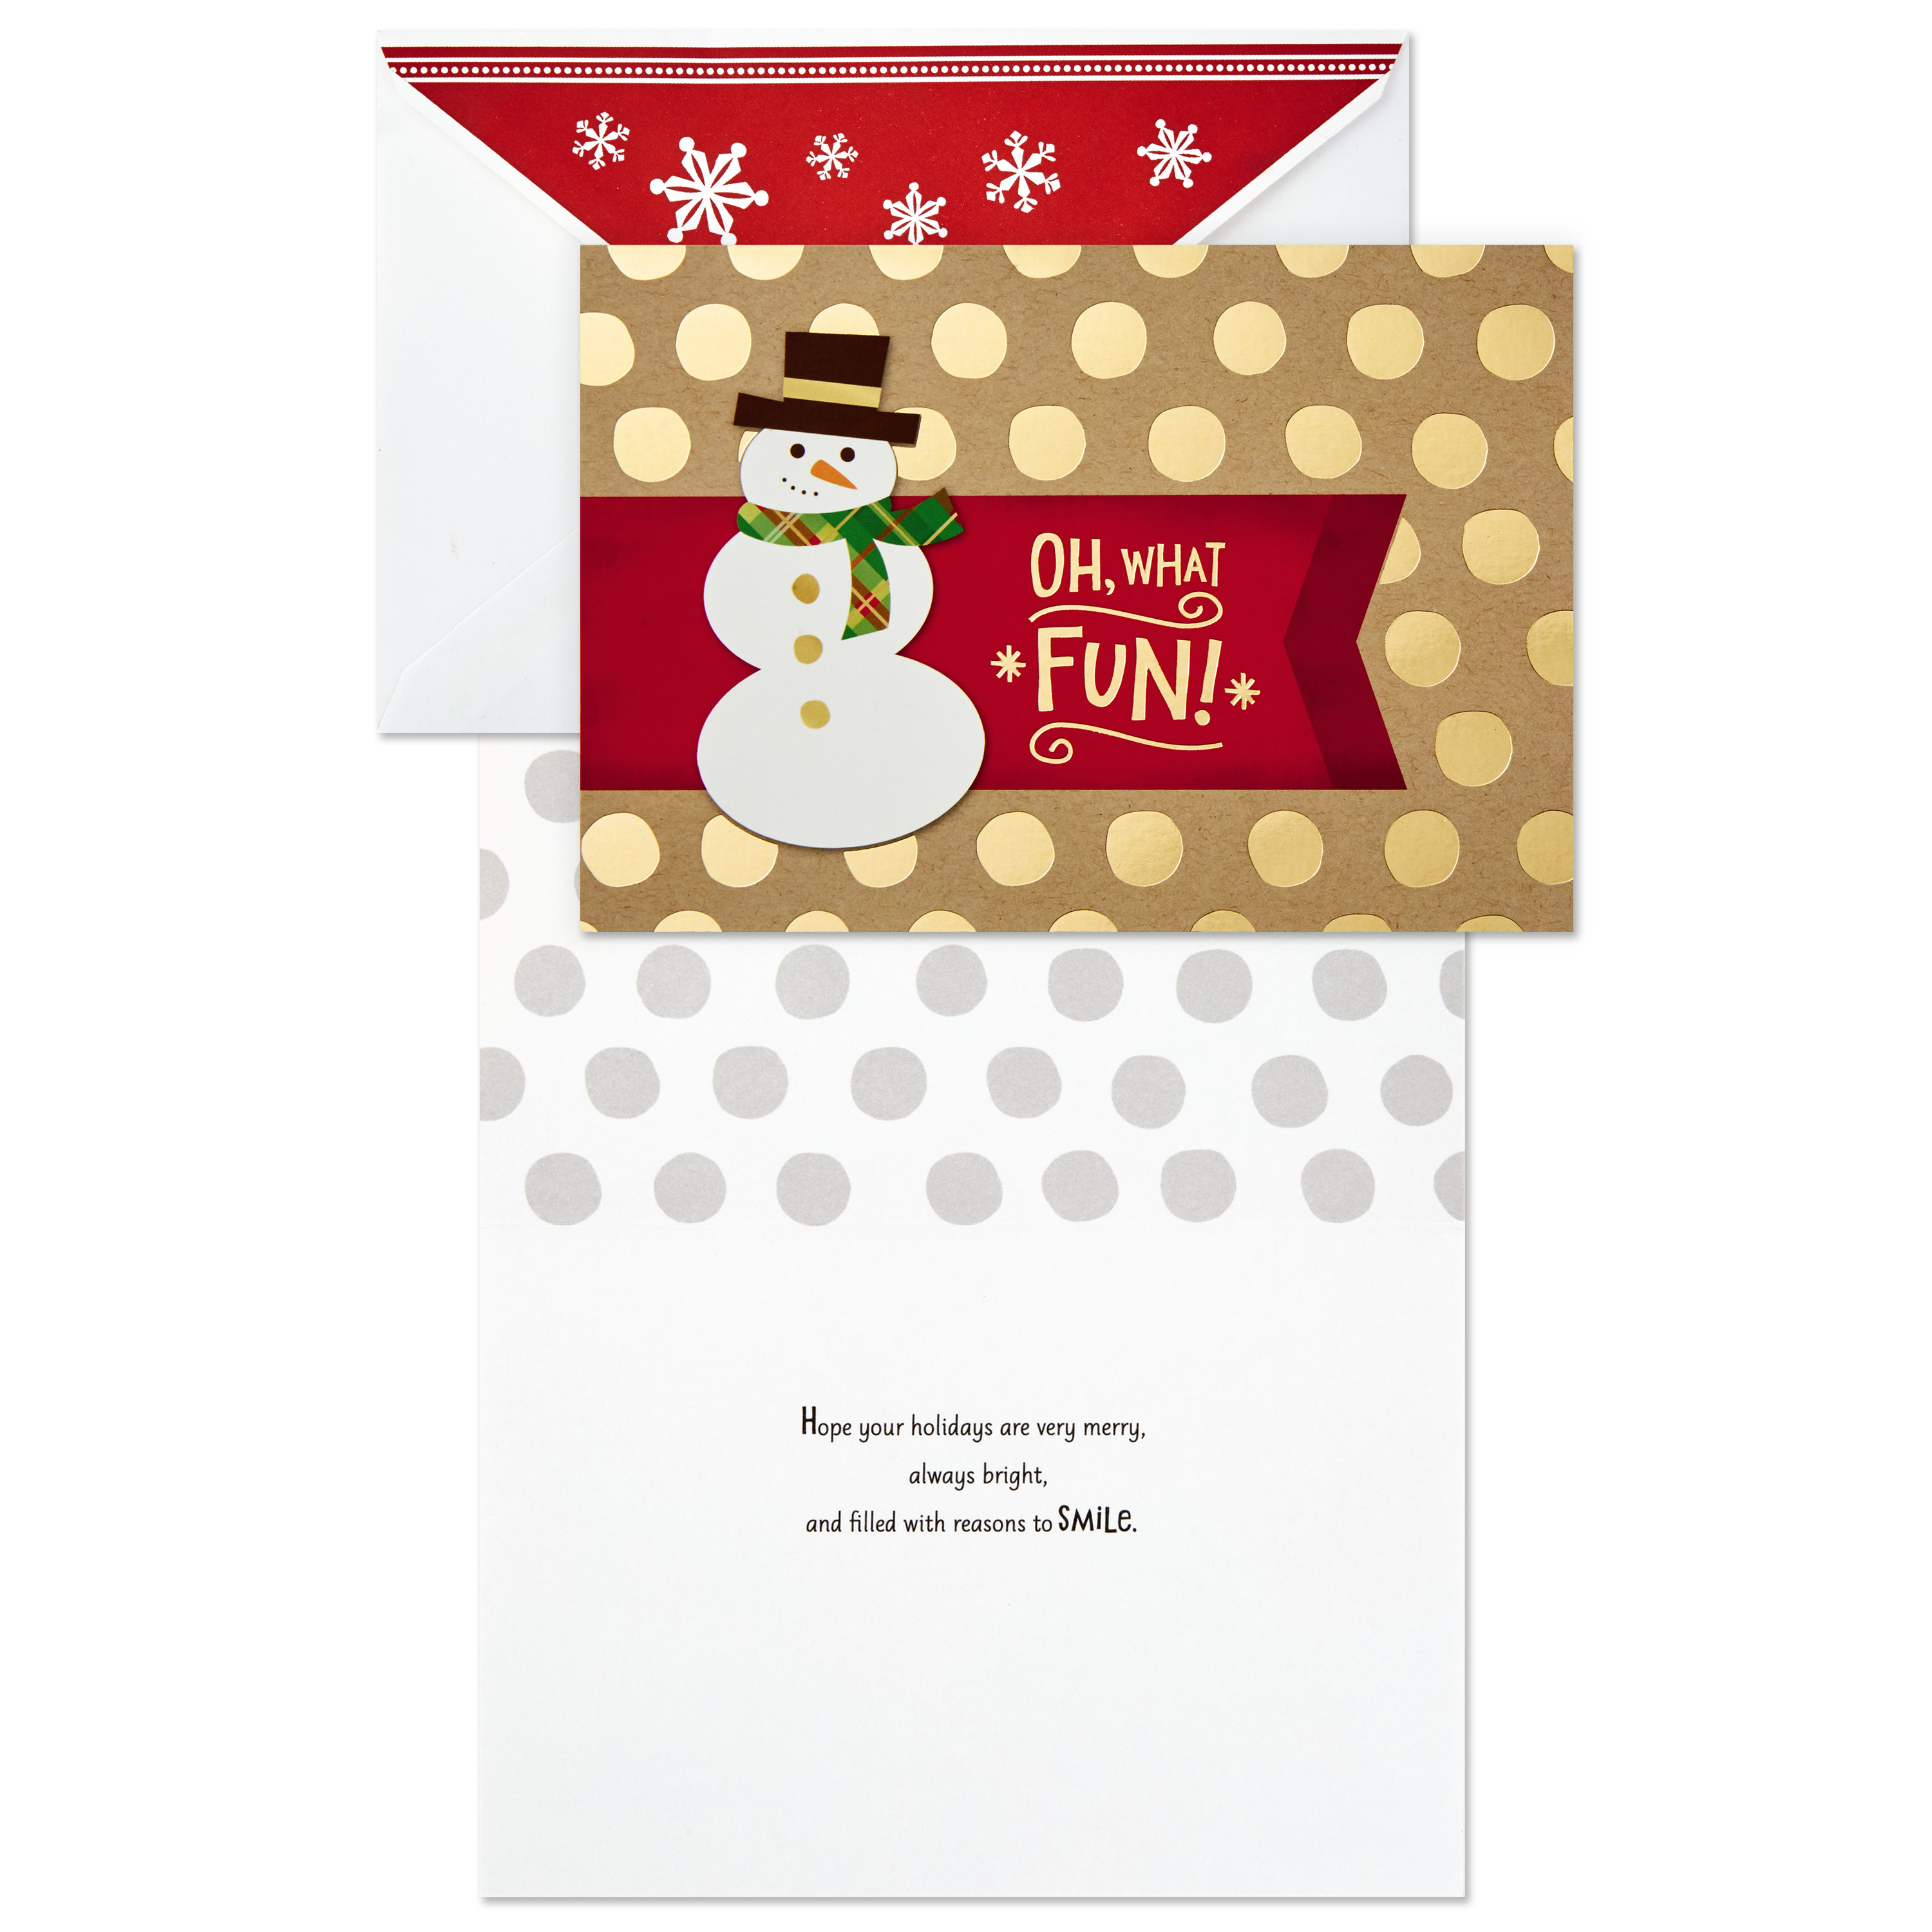 Hallmark Christmas Boxed Greeting Card Assortment, Snowman and Christmas Tree (40 Cards with Envelopes and Gold Seals) - image 5 of 7